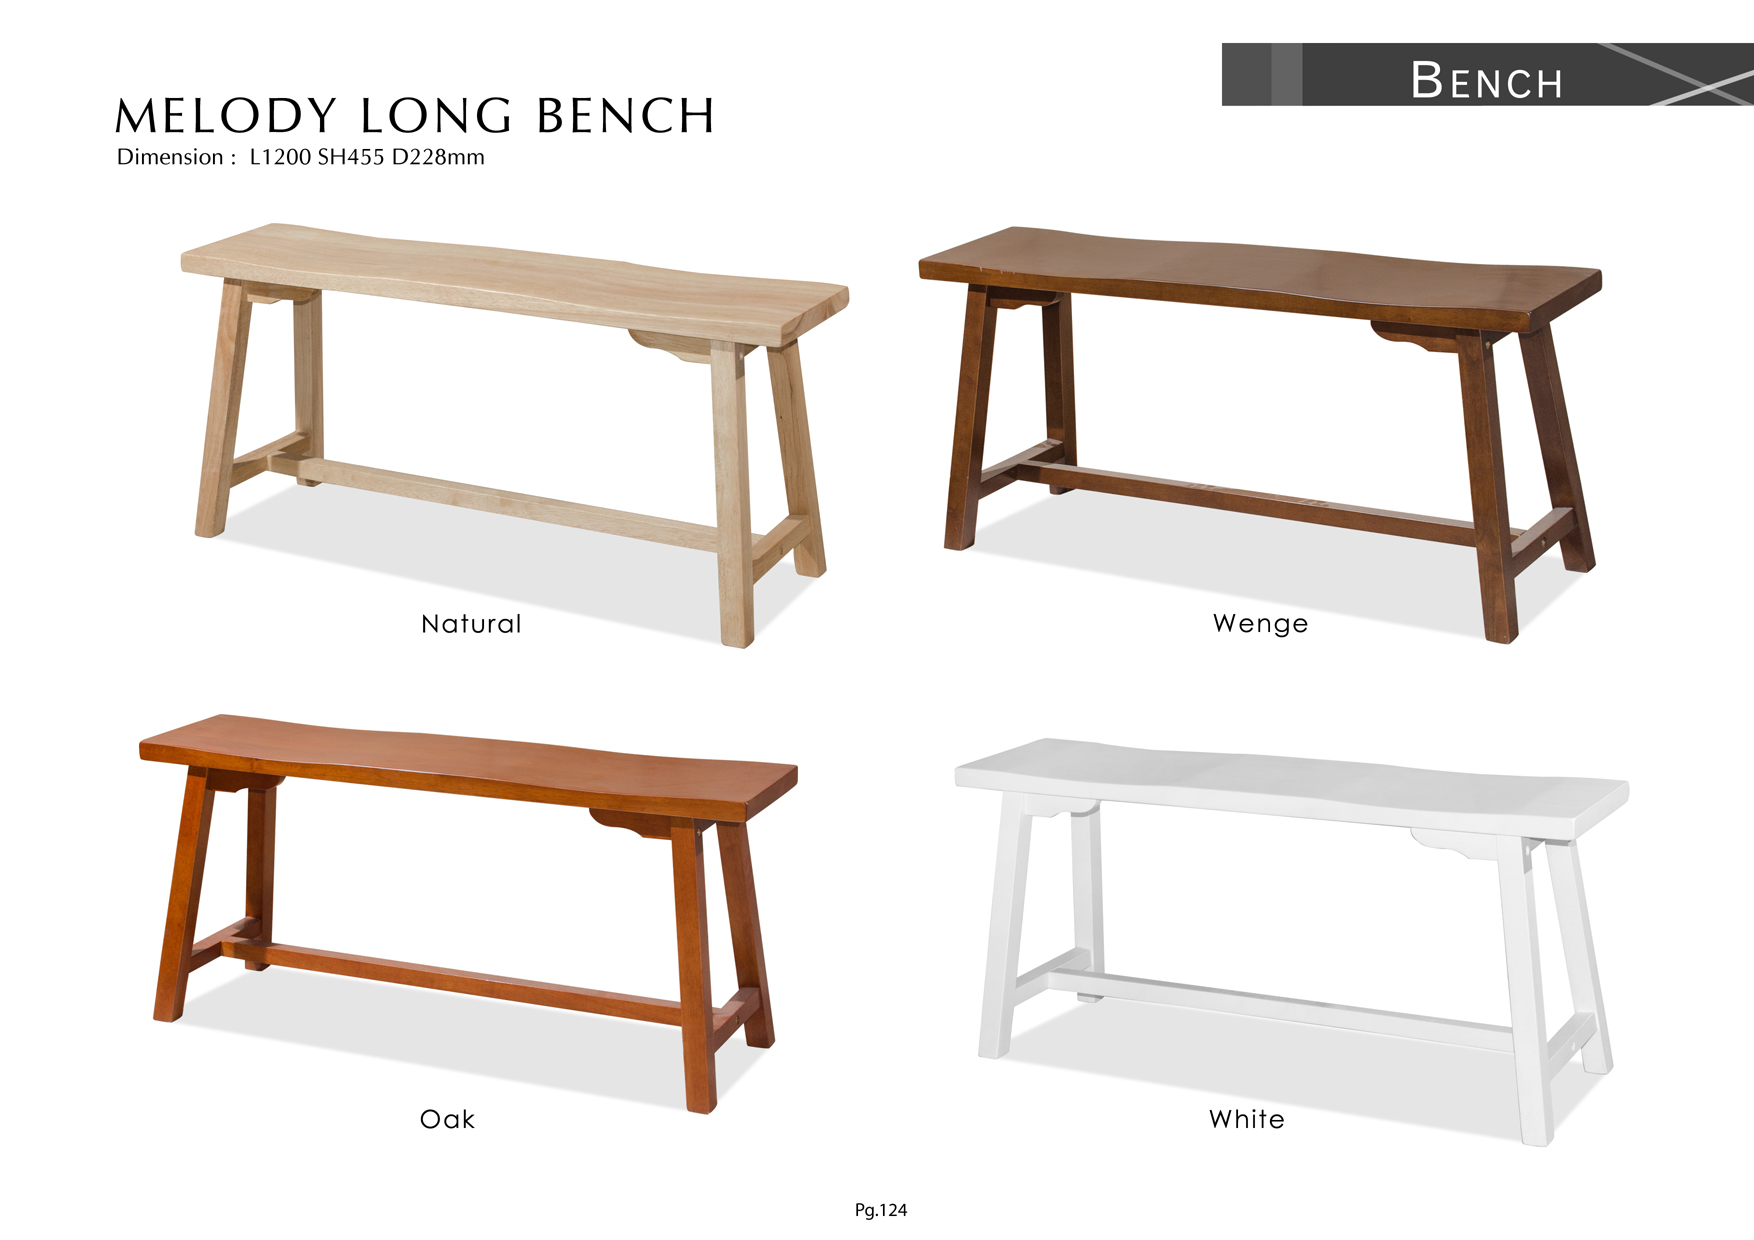 Product: PG124. MELODY LONG BENCH